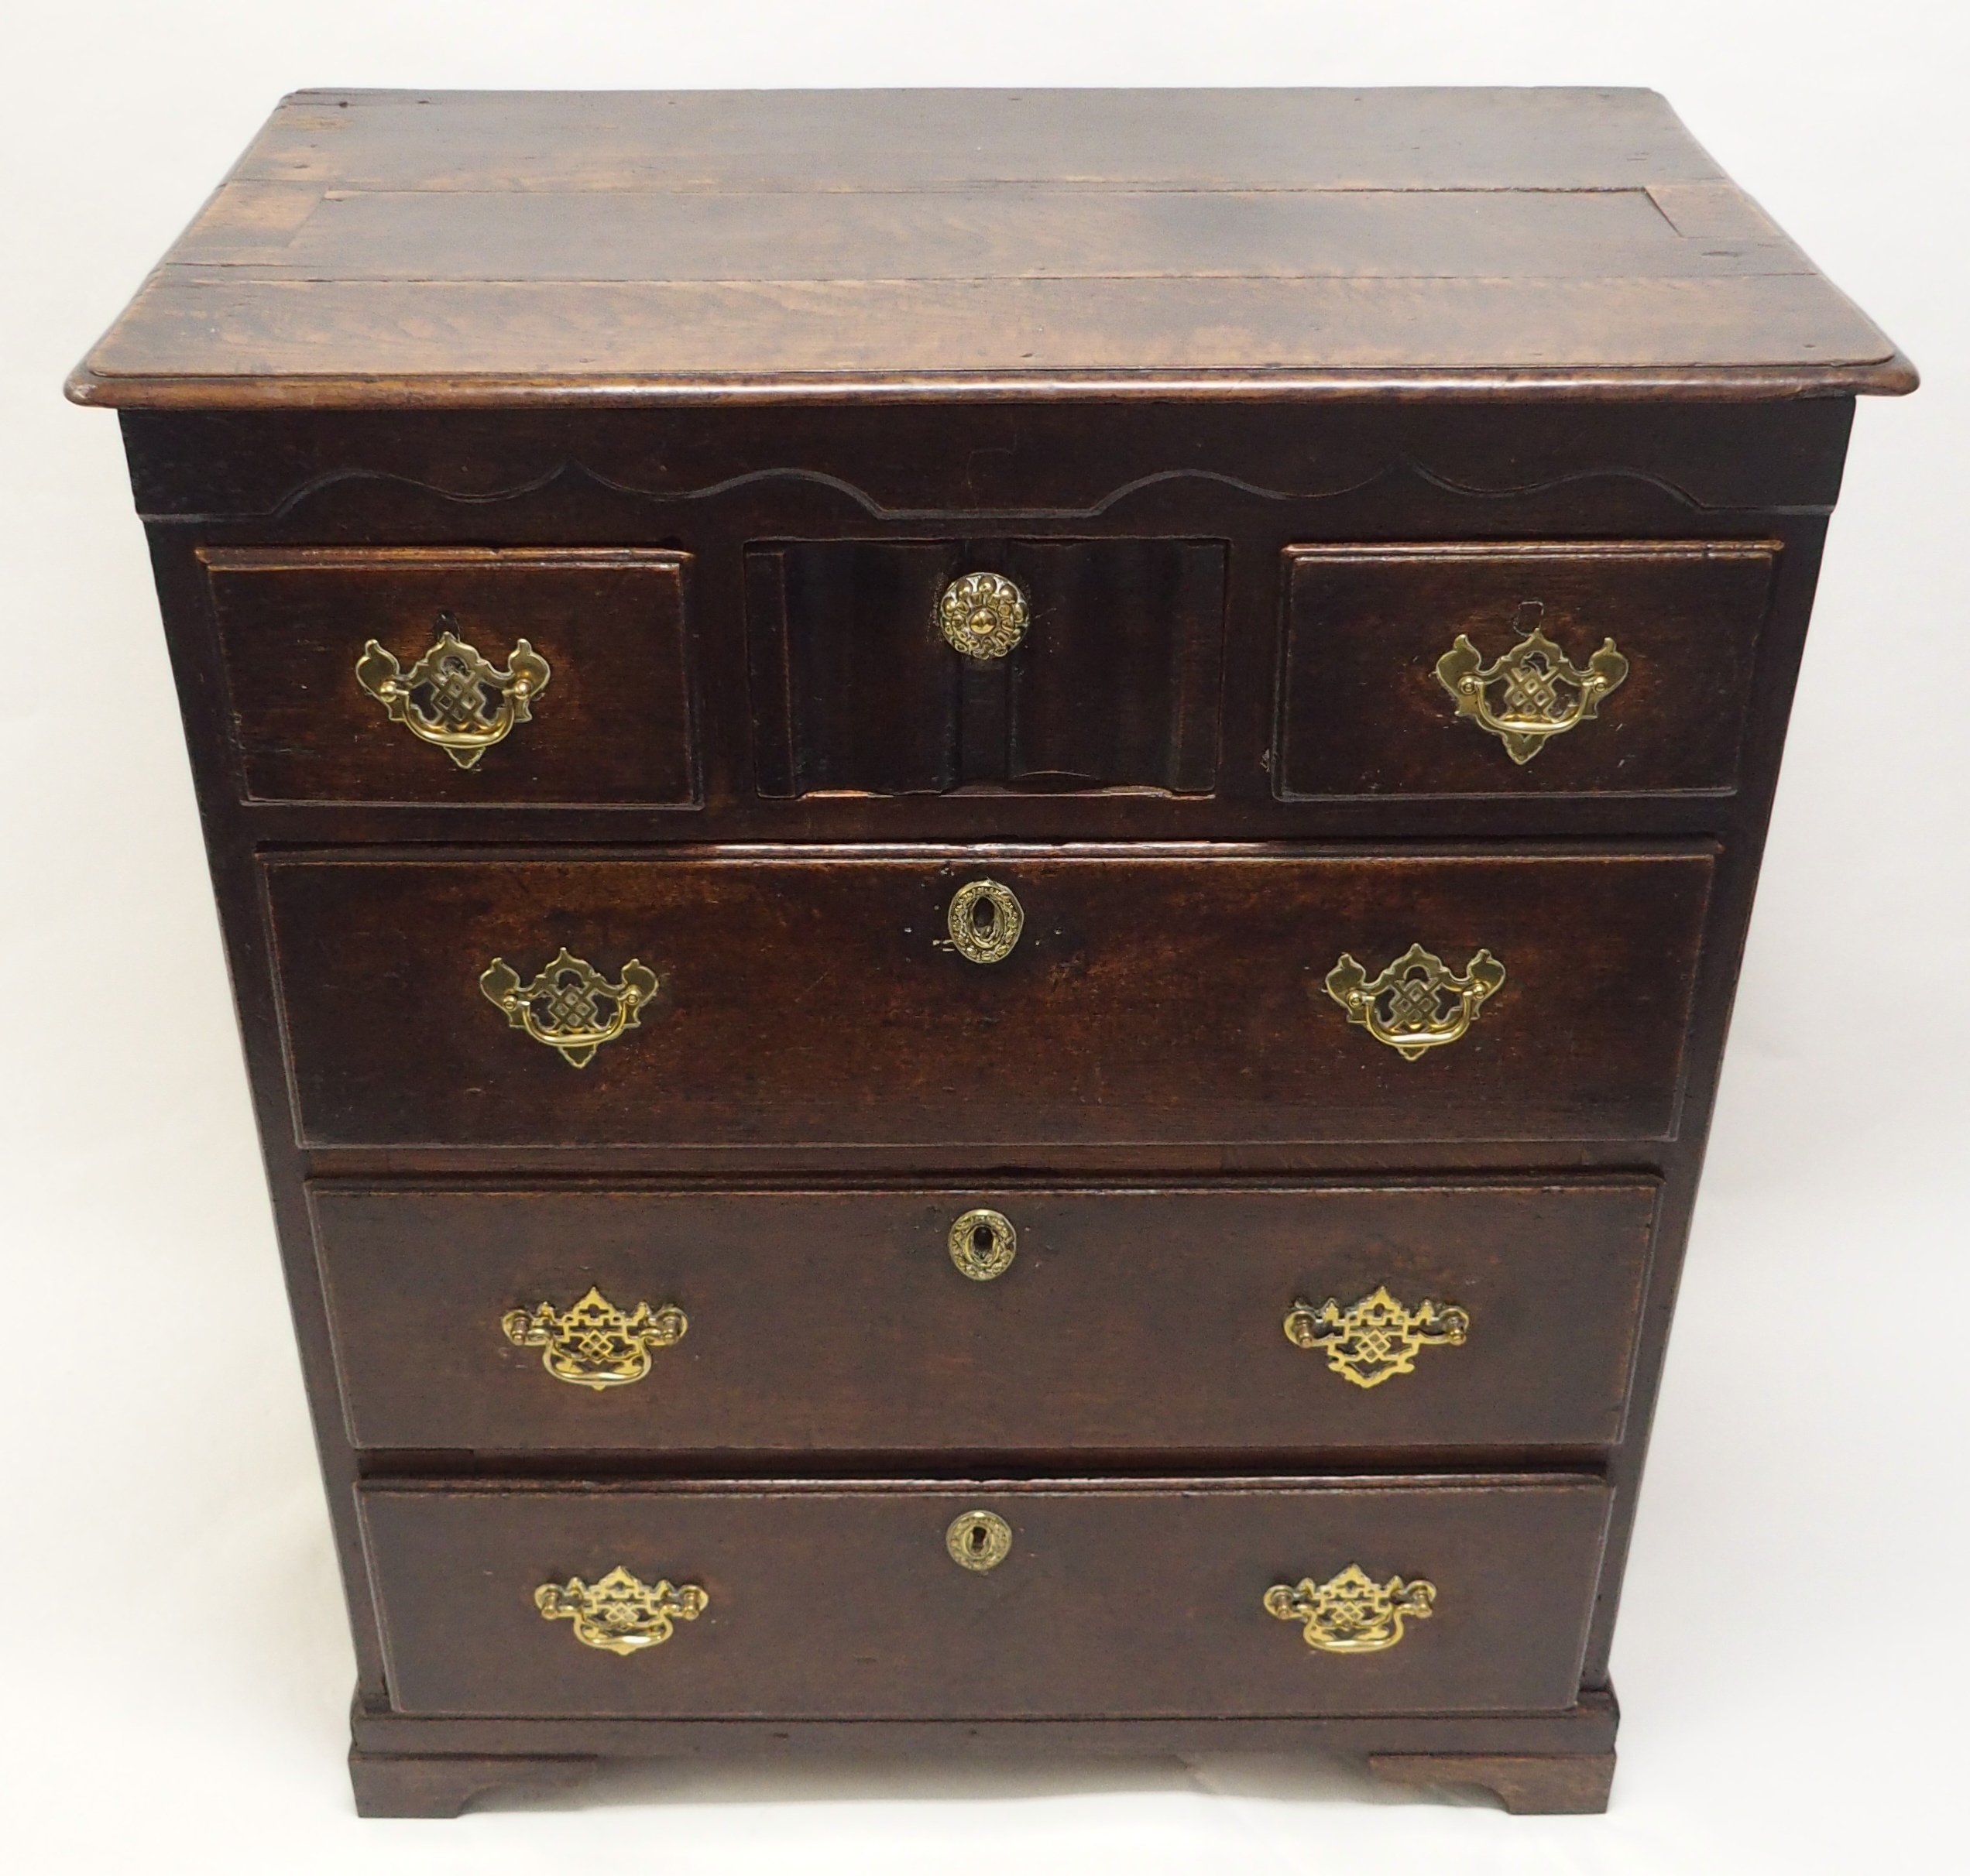 AN 18TH CENTURY OAK CHEST with shaped frieze above a central linen fold drawer, flanked by two short